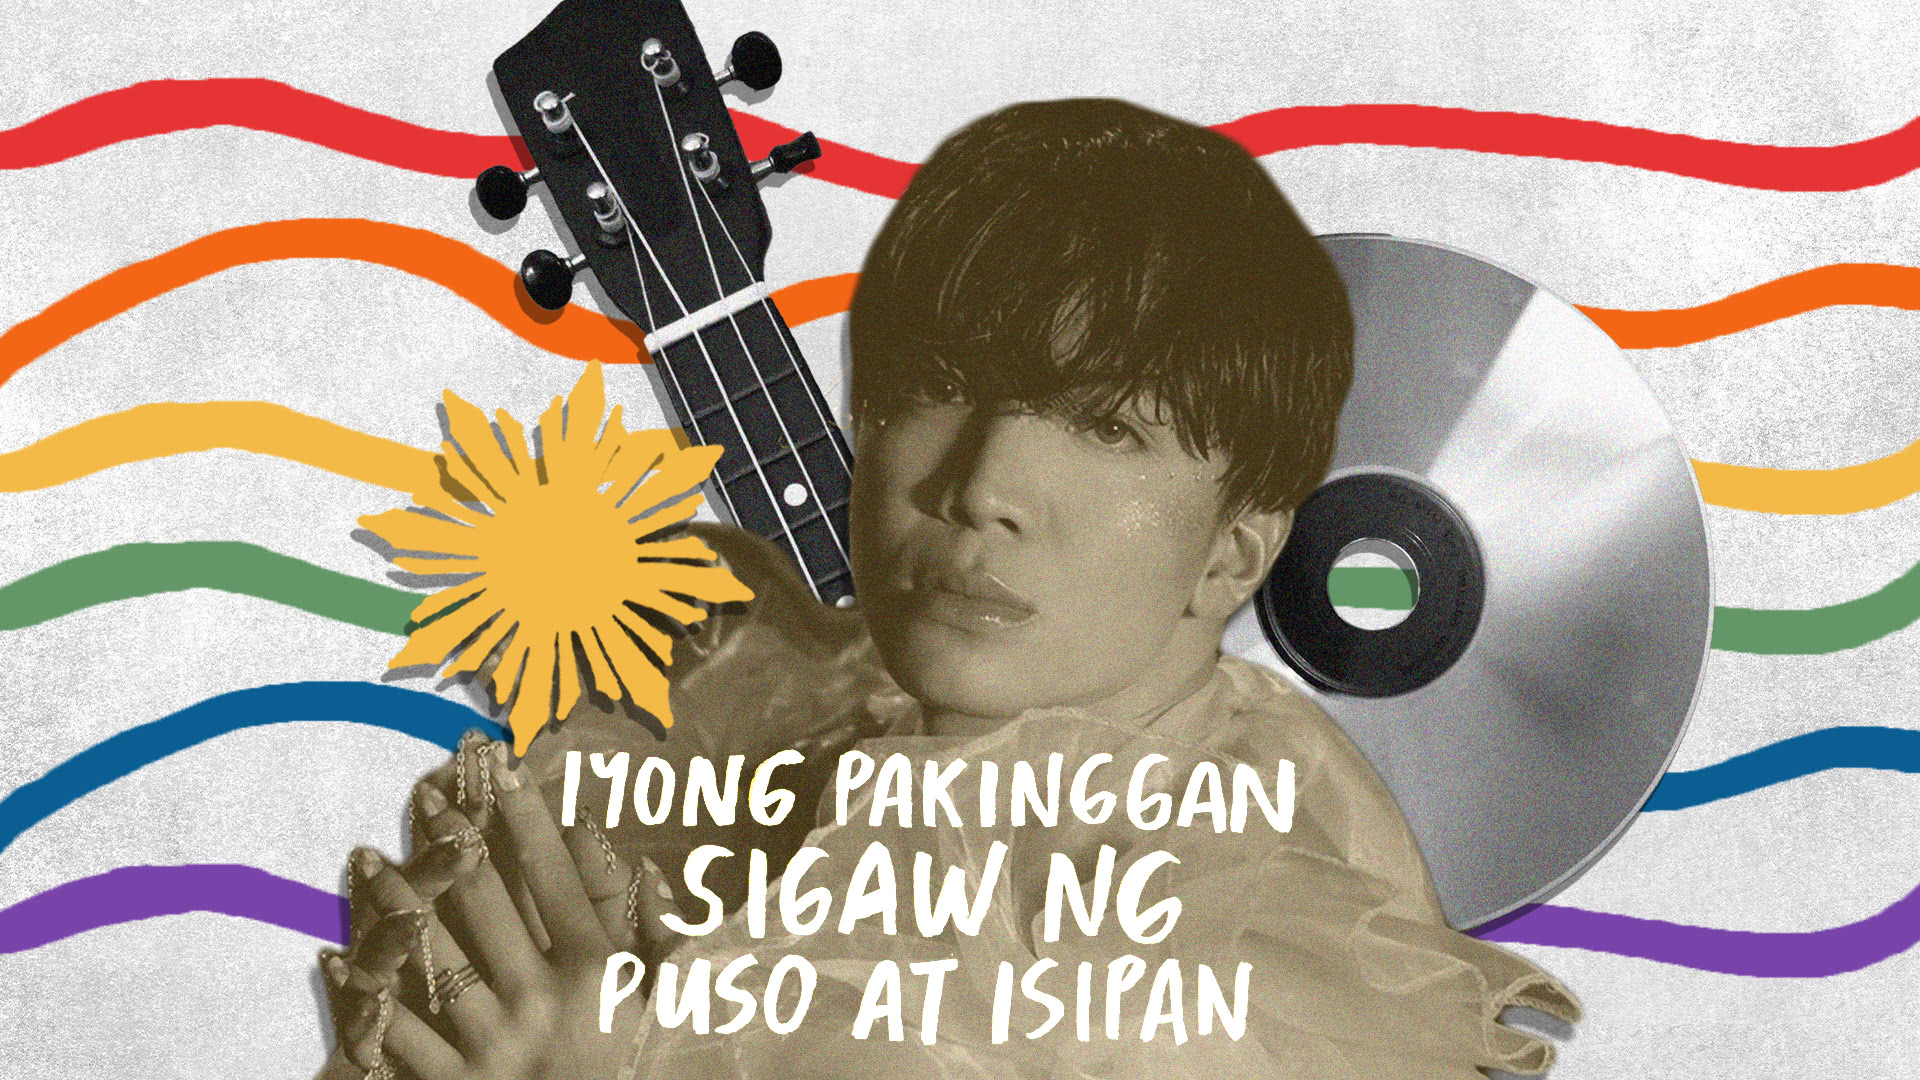 In between the notes and staves, the queer Filipino shines